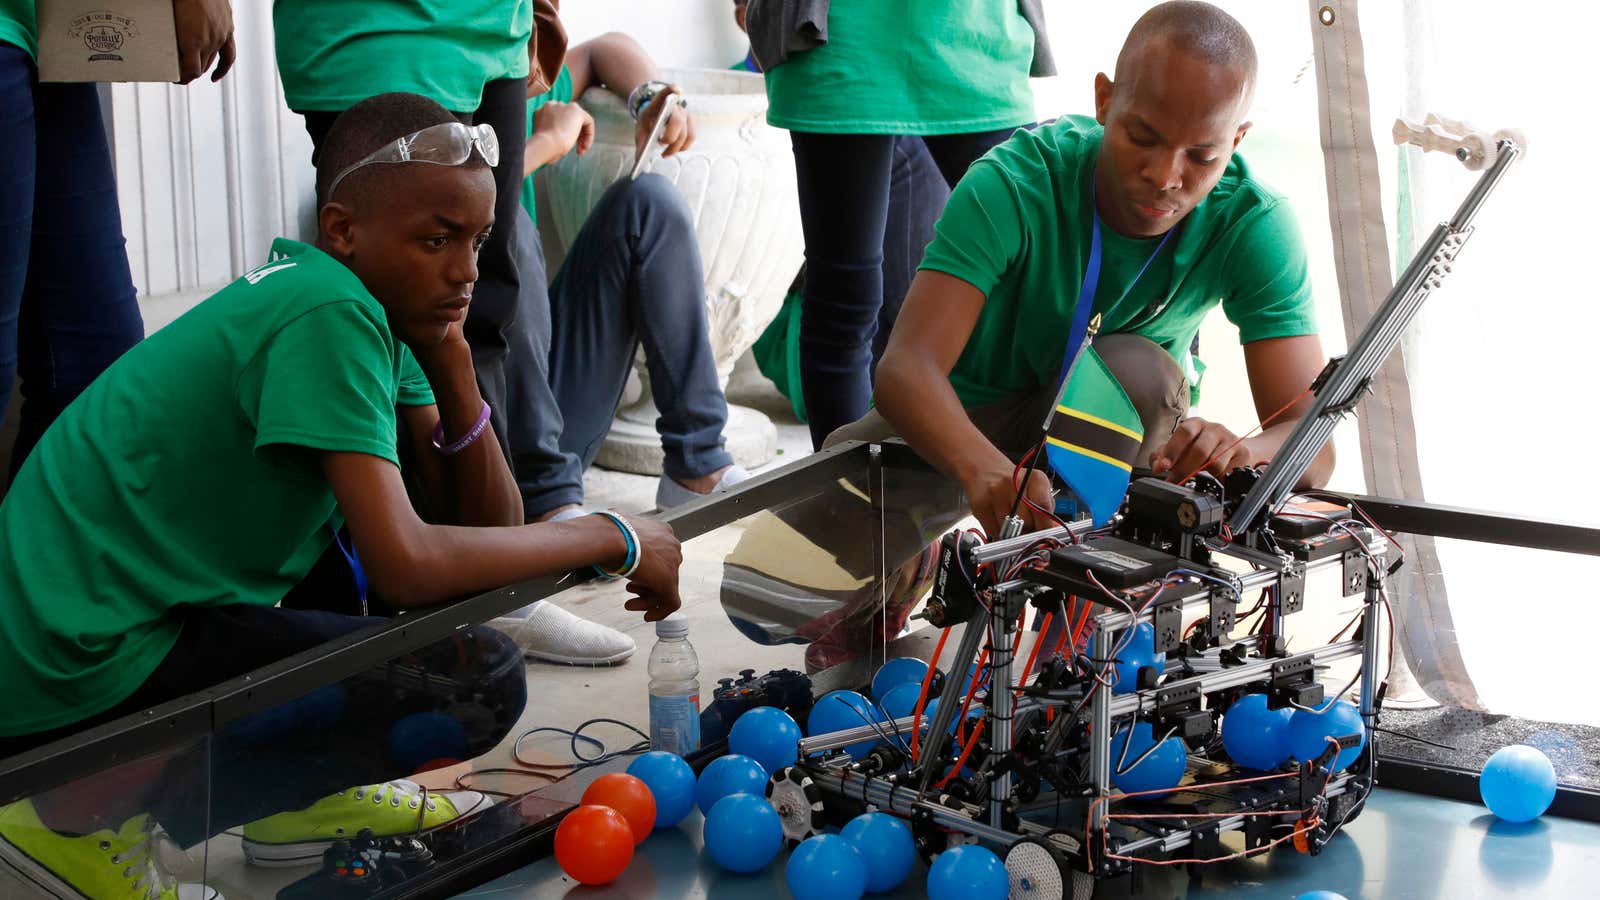 Godbright Nixon Uiso, 16, left, and Raymond Benedict, 18, with Team Tanzania, practice working their robot at the FIRST Global Robotics Challenge, Monday, July 17,…